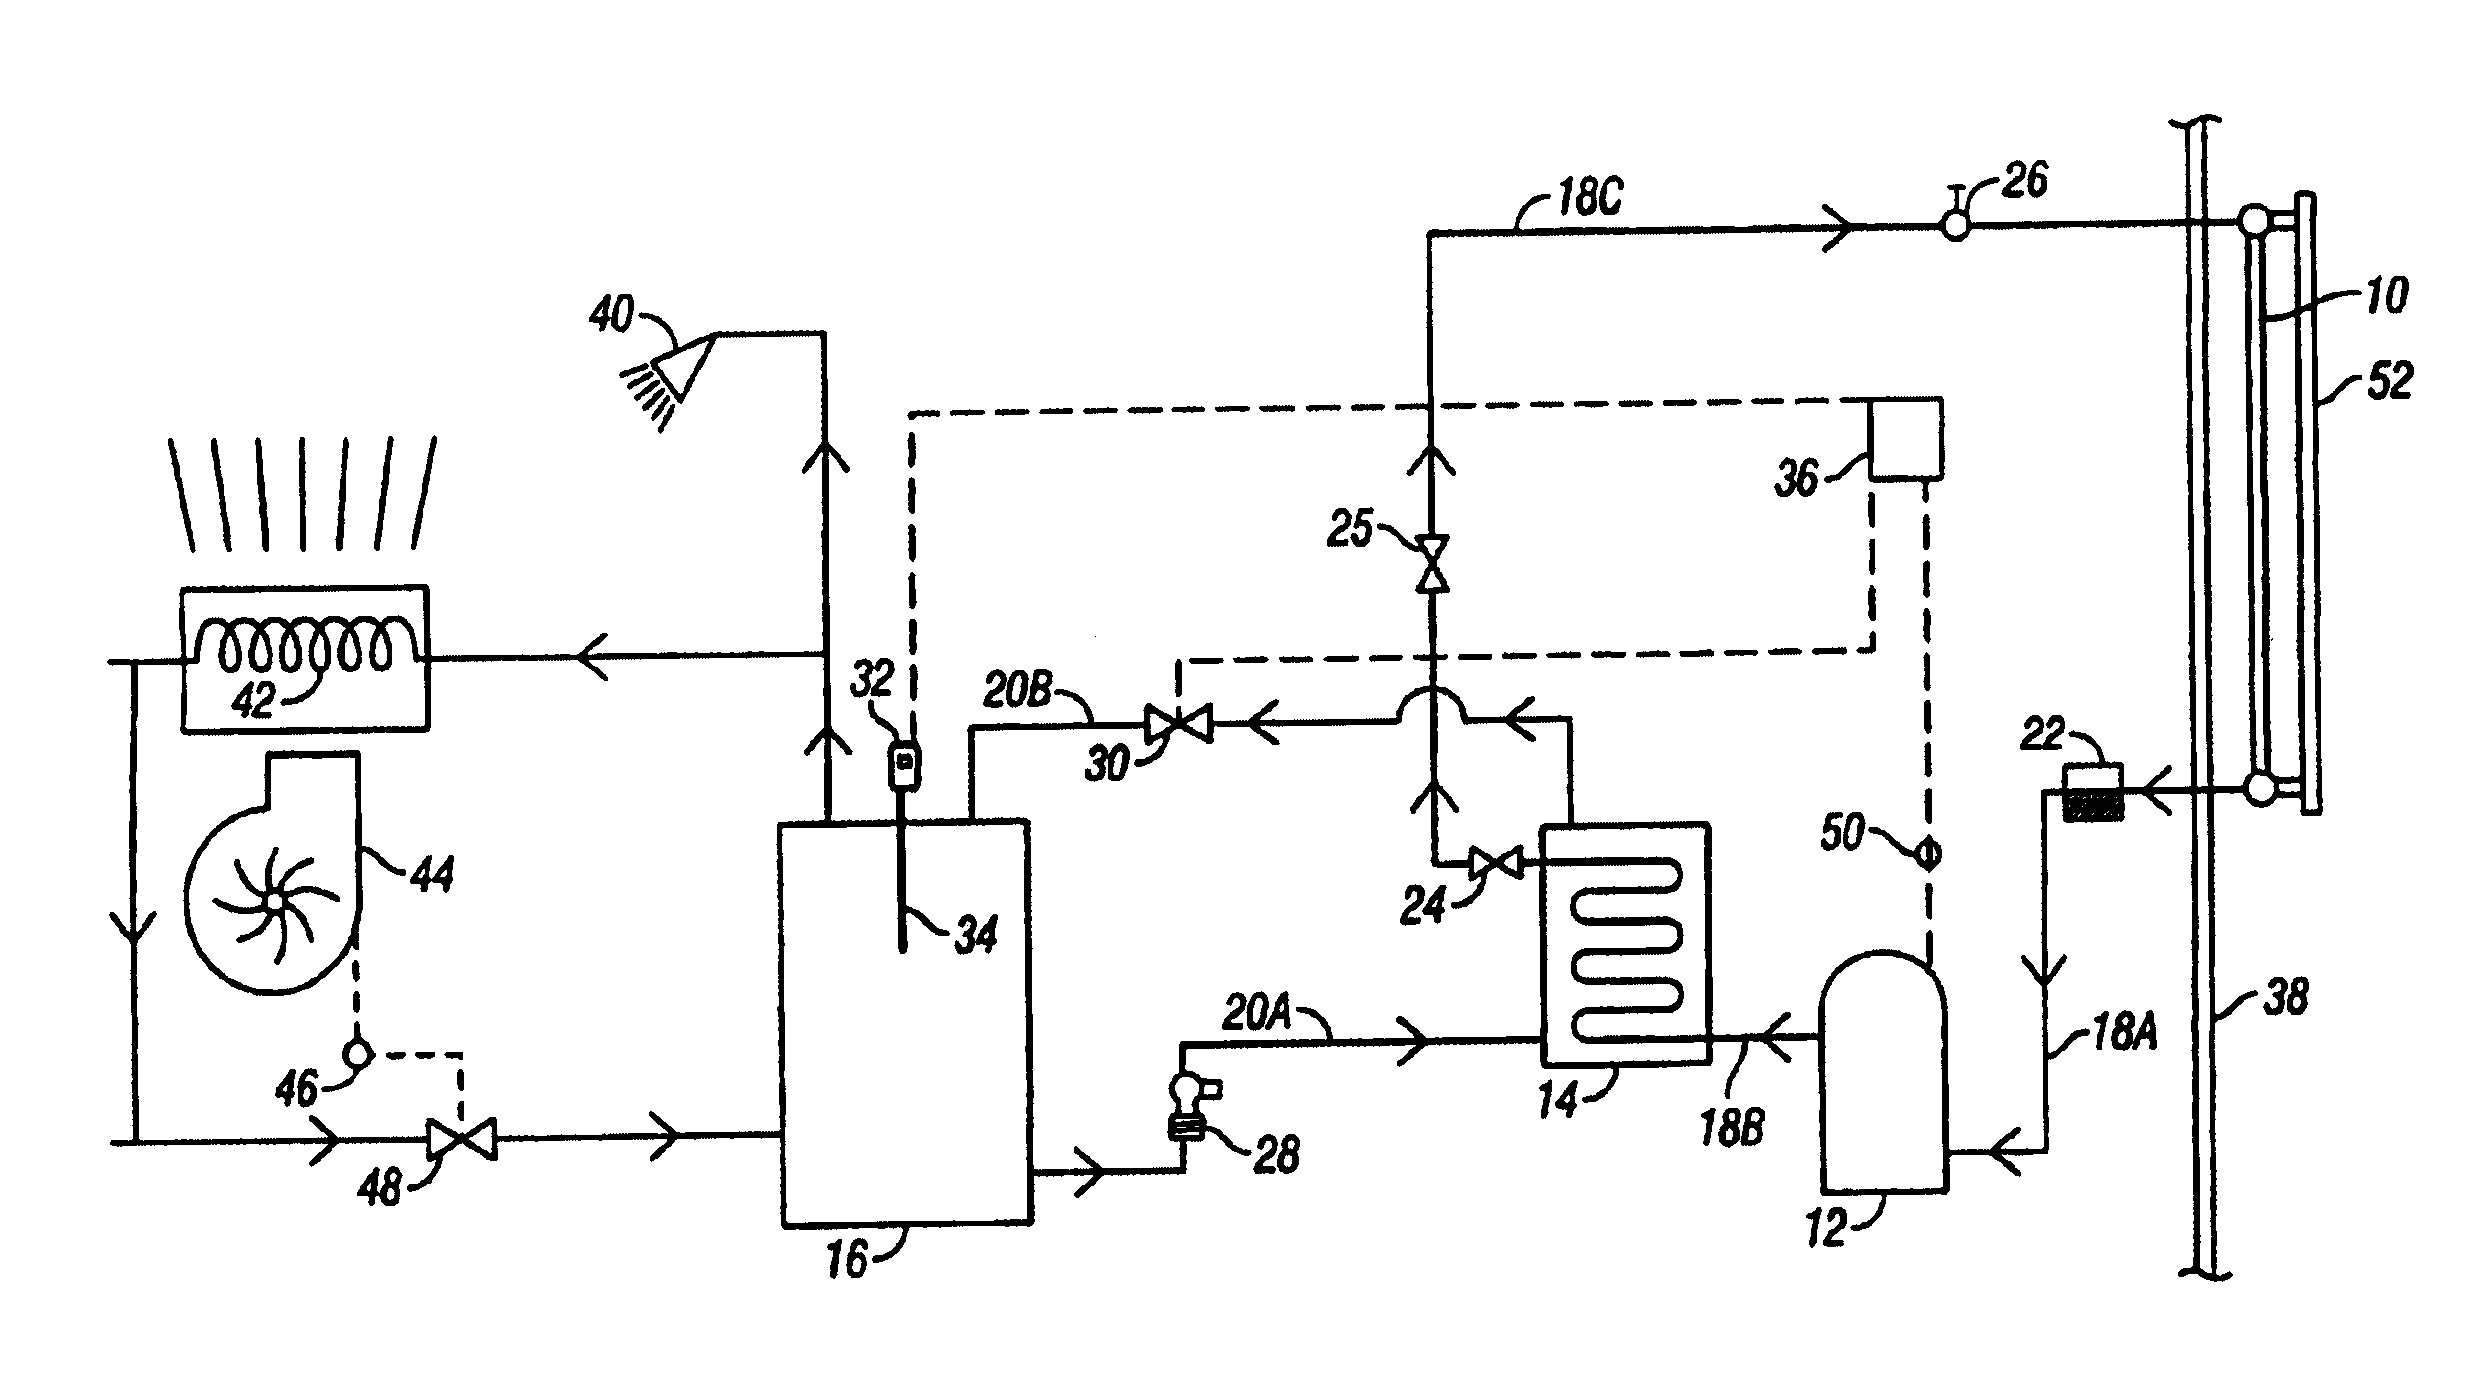 Ambient thermal energy recovery system